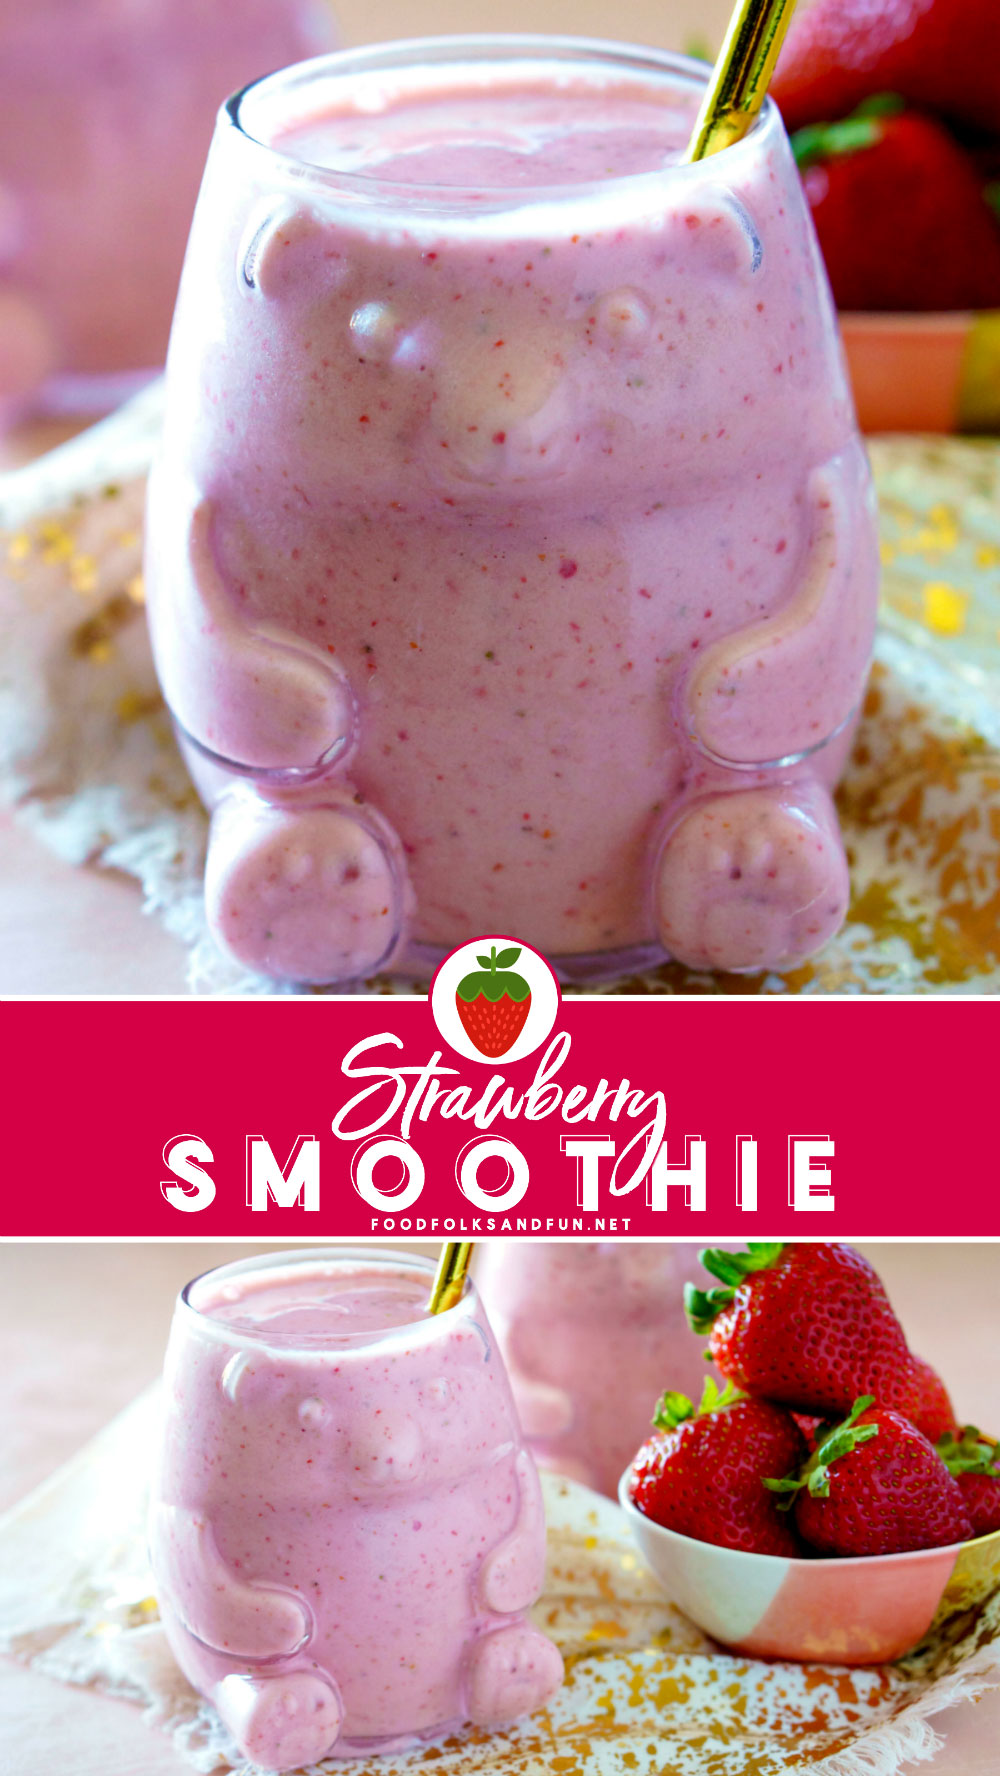 This Strawberry Smoothie recipe is a quick and easy 3 ingredient smoothie that's great for breakfast on the go!  via @foodfolksandfun